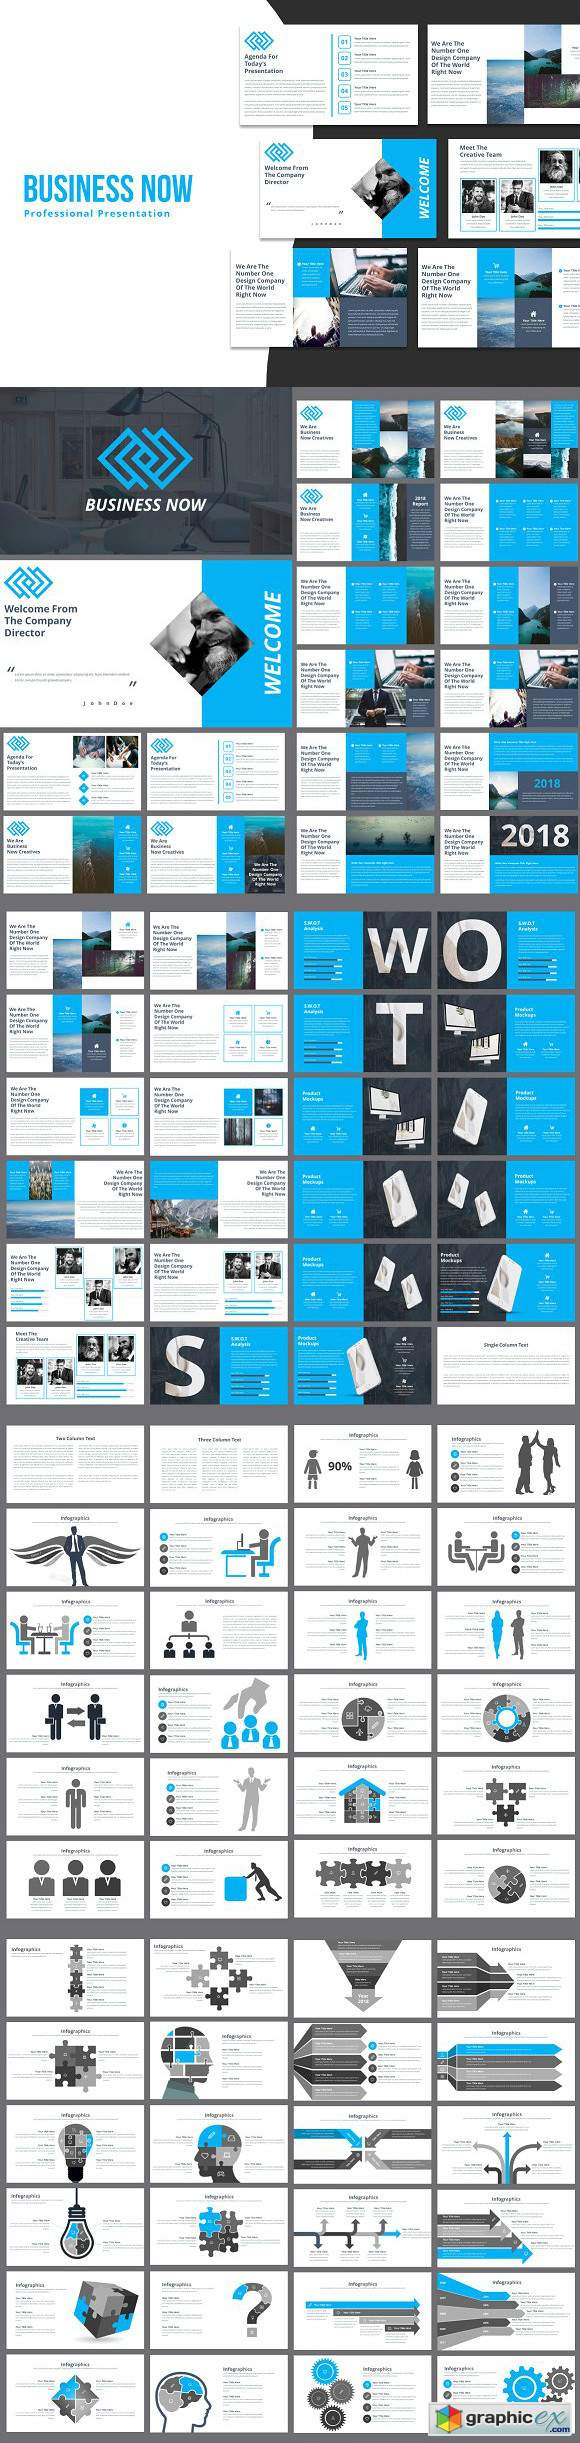 Business Now Powerpoint Template